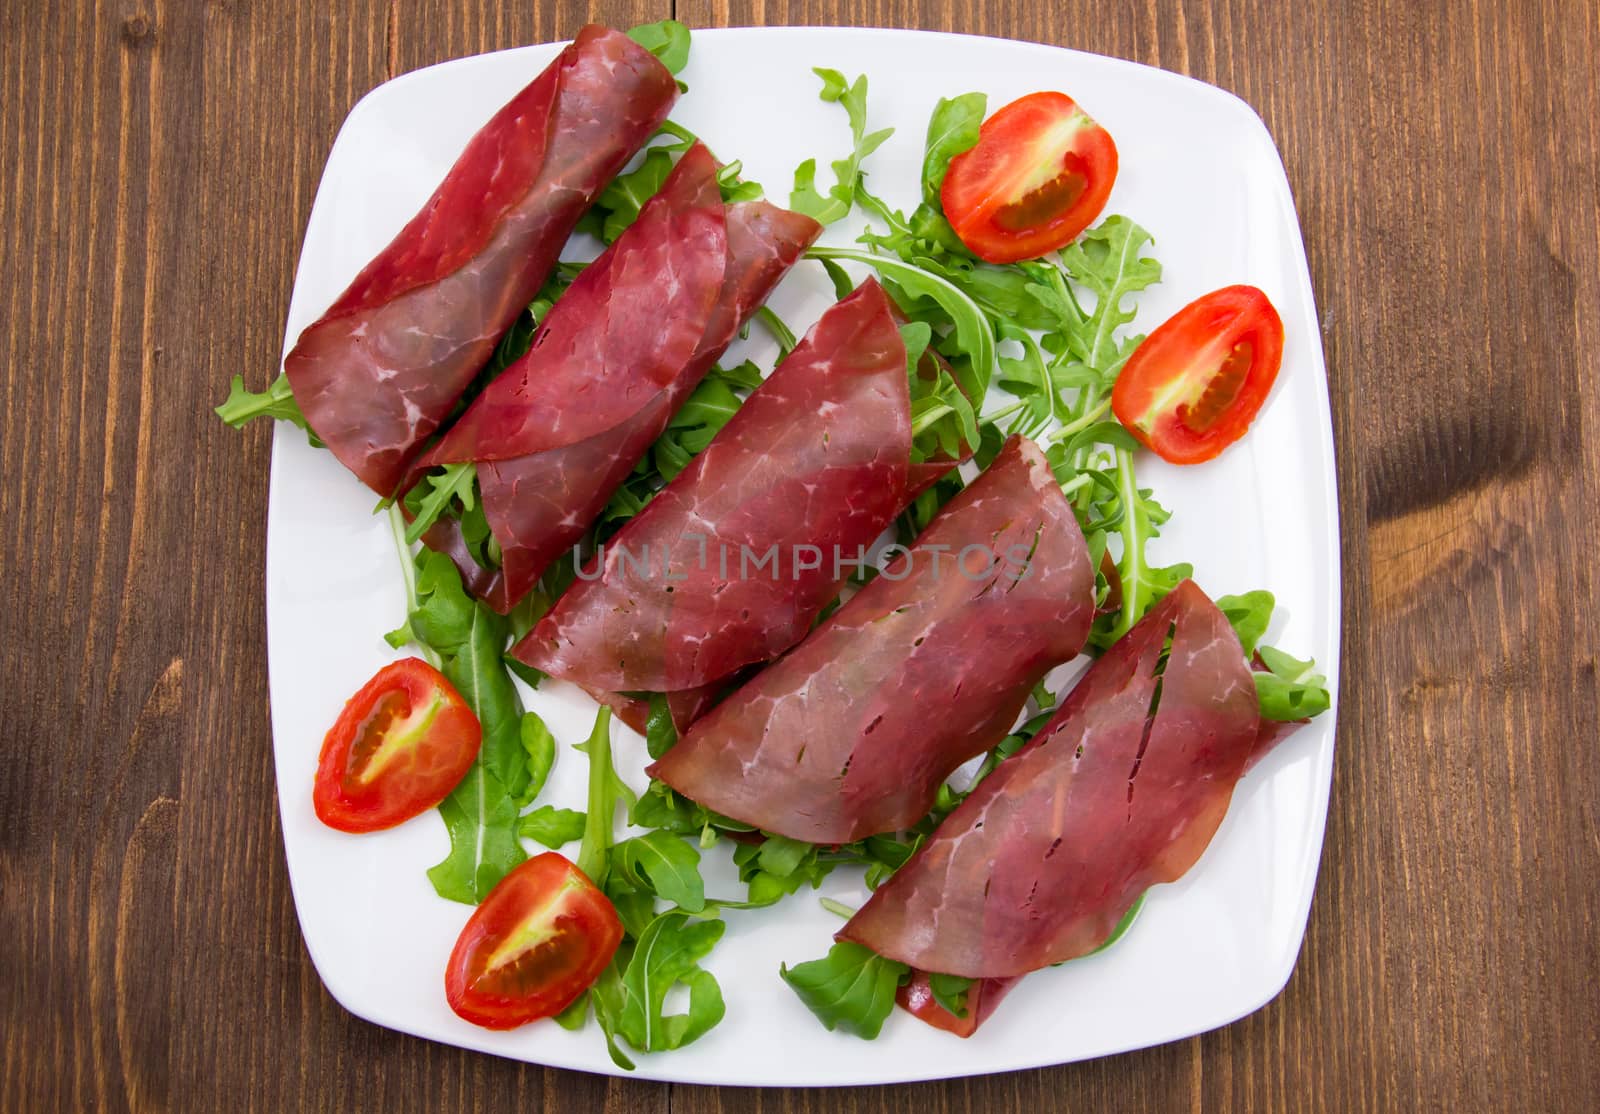 Rolls of dried beef on plate over wooden table seen from above